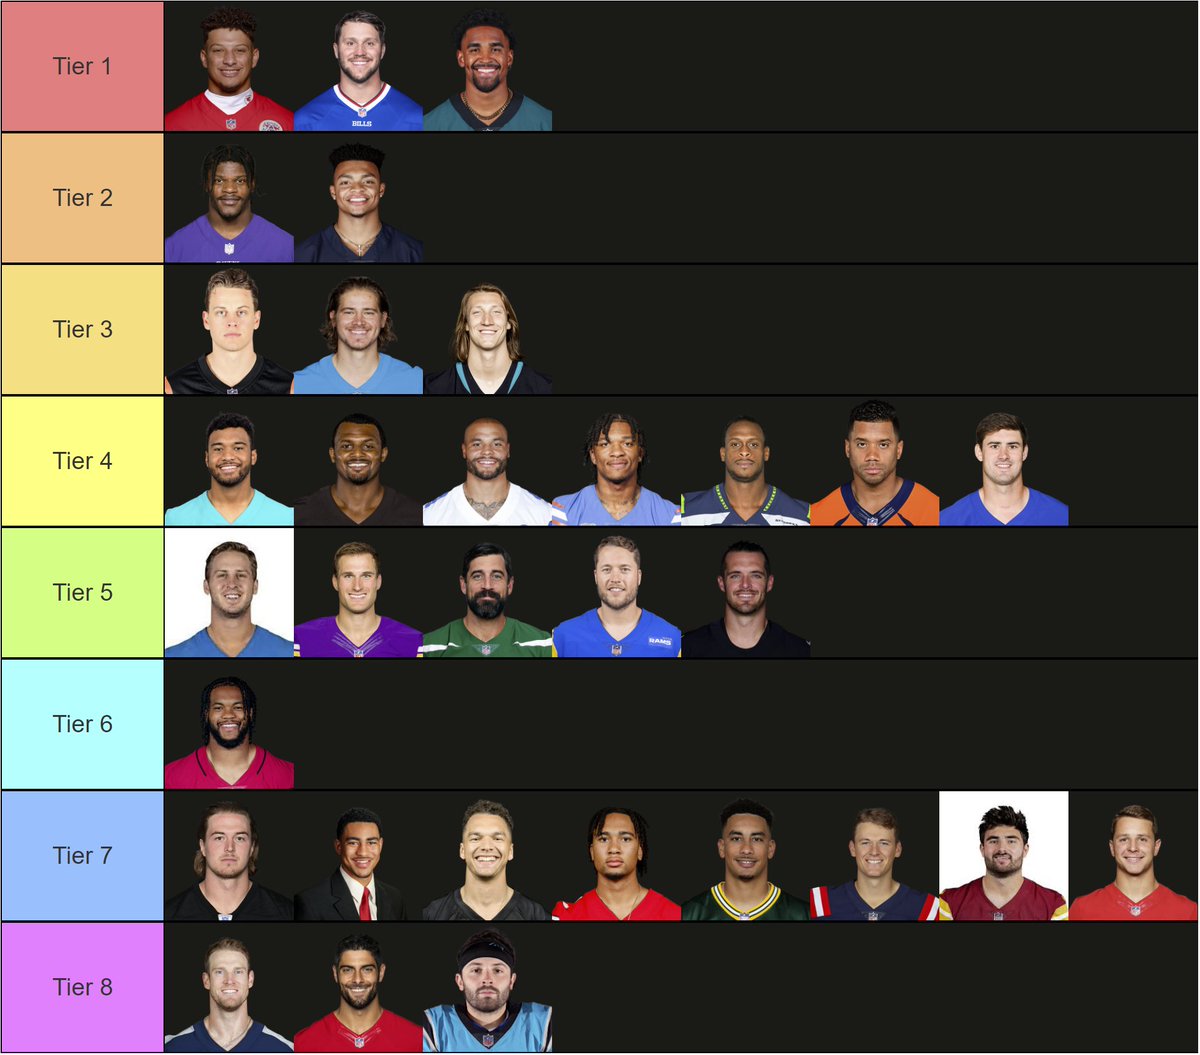 the definitive 2023 QB scoring tiers

and 11,132 words scientifically describing why each player is meticulously placed in their tier:

sharpfootballanalysis.com/fantasy/quarte…

if you read 1 article today ⬆️ is it

I learn something new every time I read @LordReebs & this is one of his best